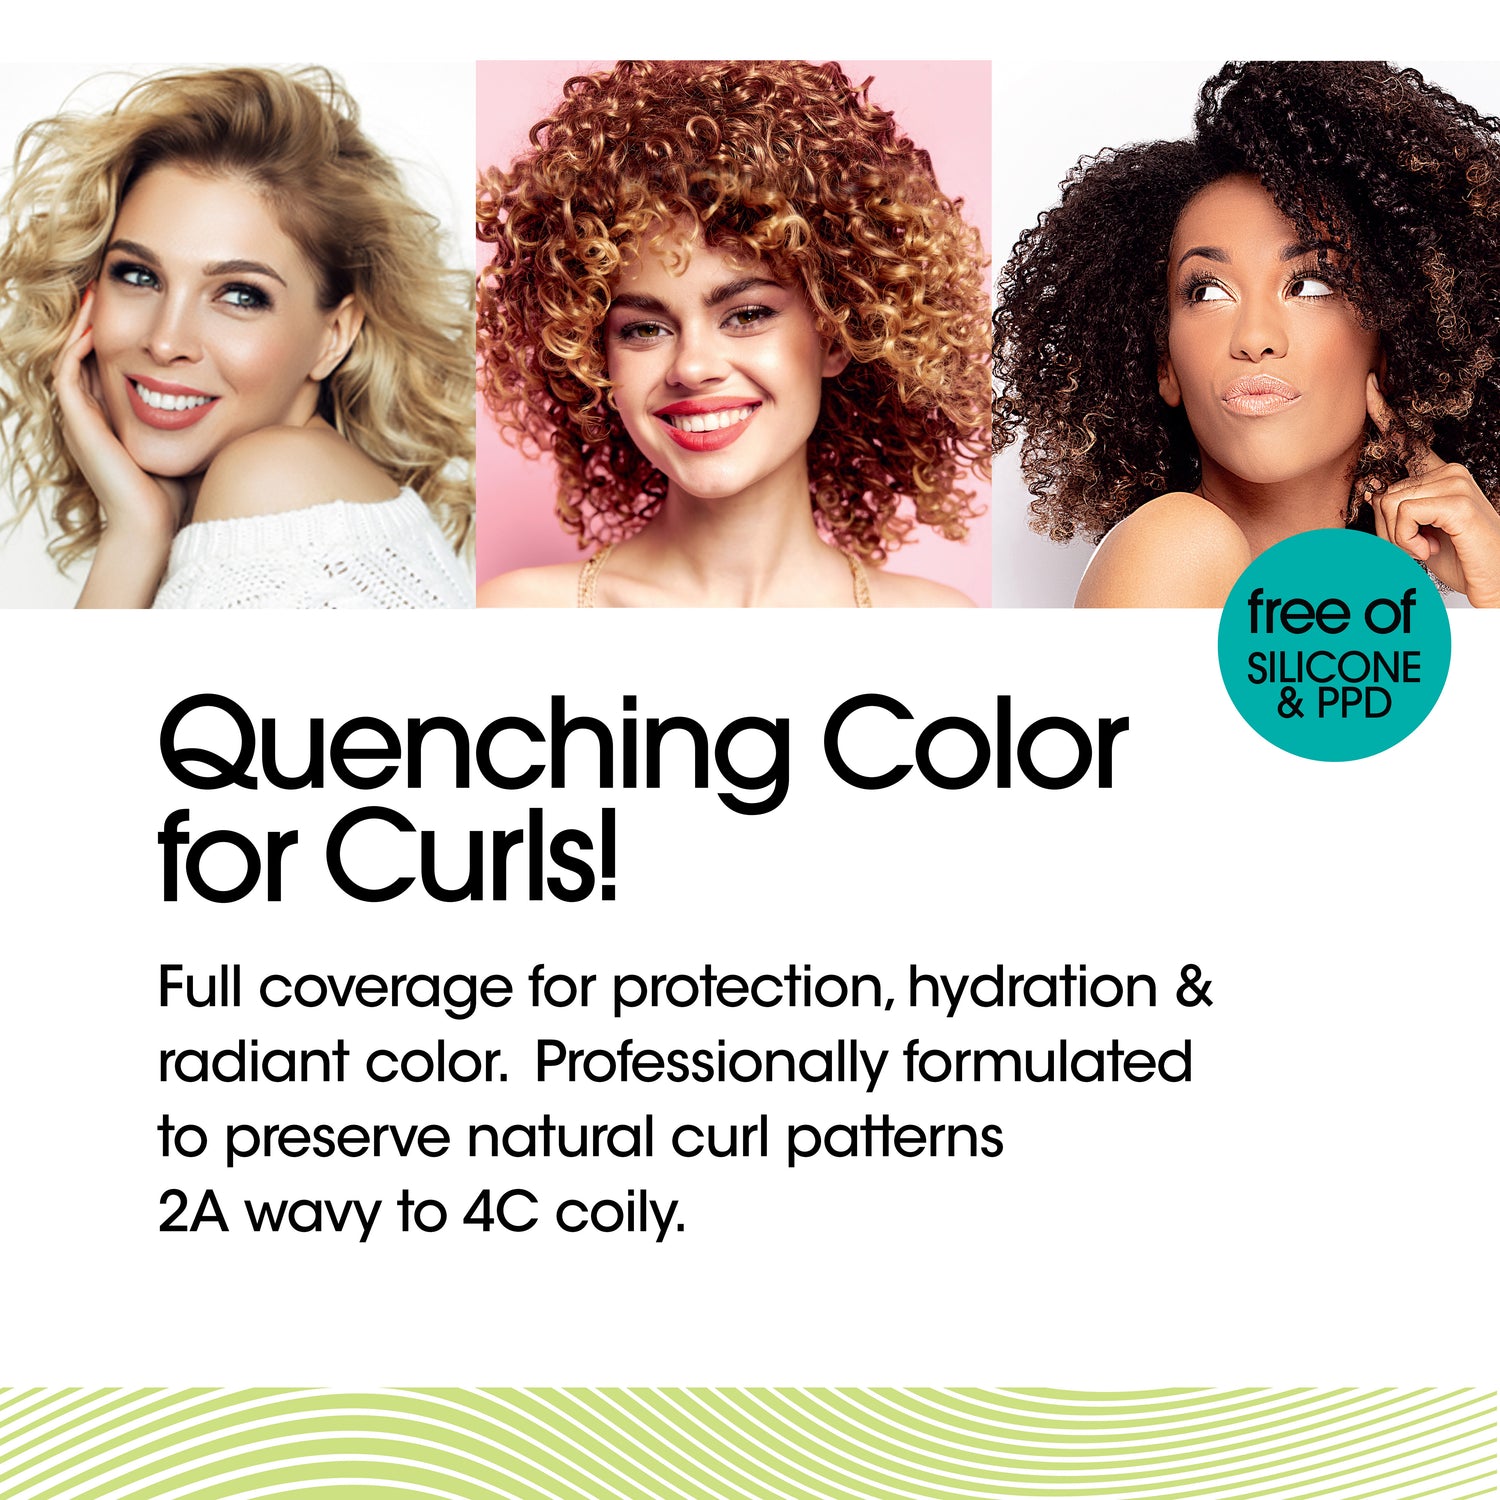 Three models with curly hair posing with the text: Quenching Color for Curls! Full coverage for protection, hydration and radiant color. Professionally formulated to preserve natural curl patterns 2A wavy to 4C coily. Free of silicone and PPD.